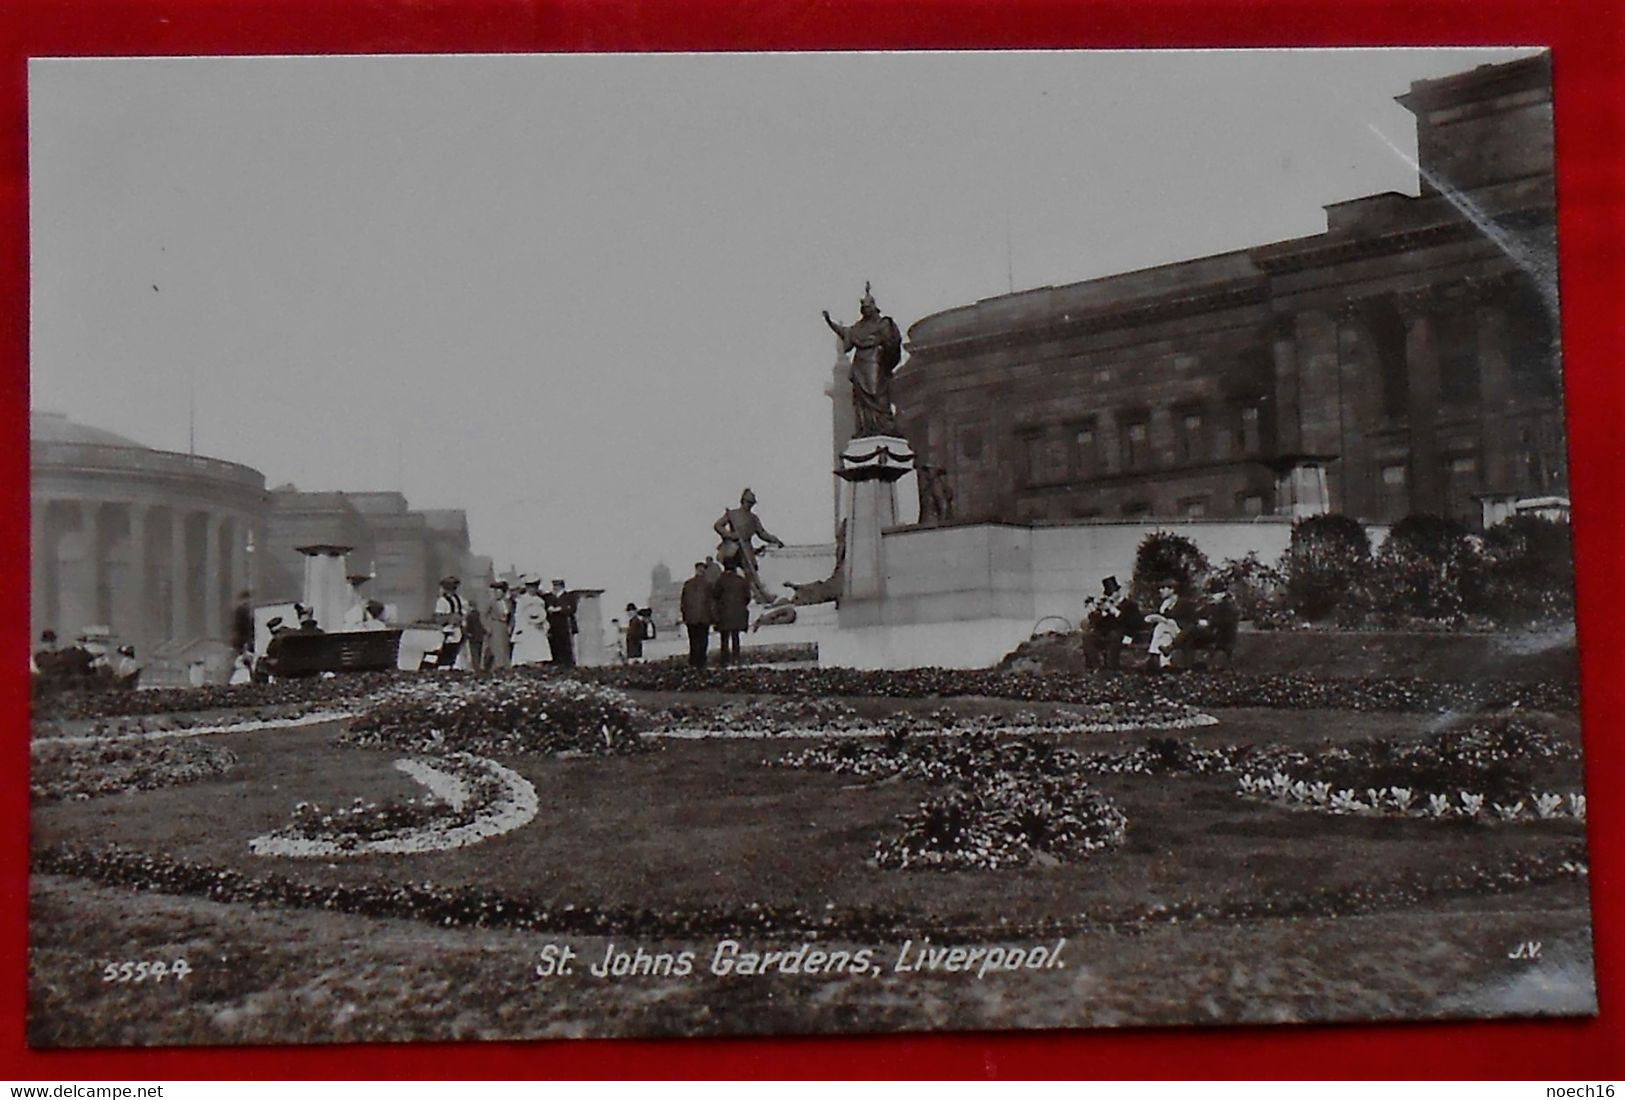 Real Photo Card - Valentine's Serie / Liverpool, St. Johns Gardens - Liverpool